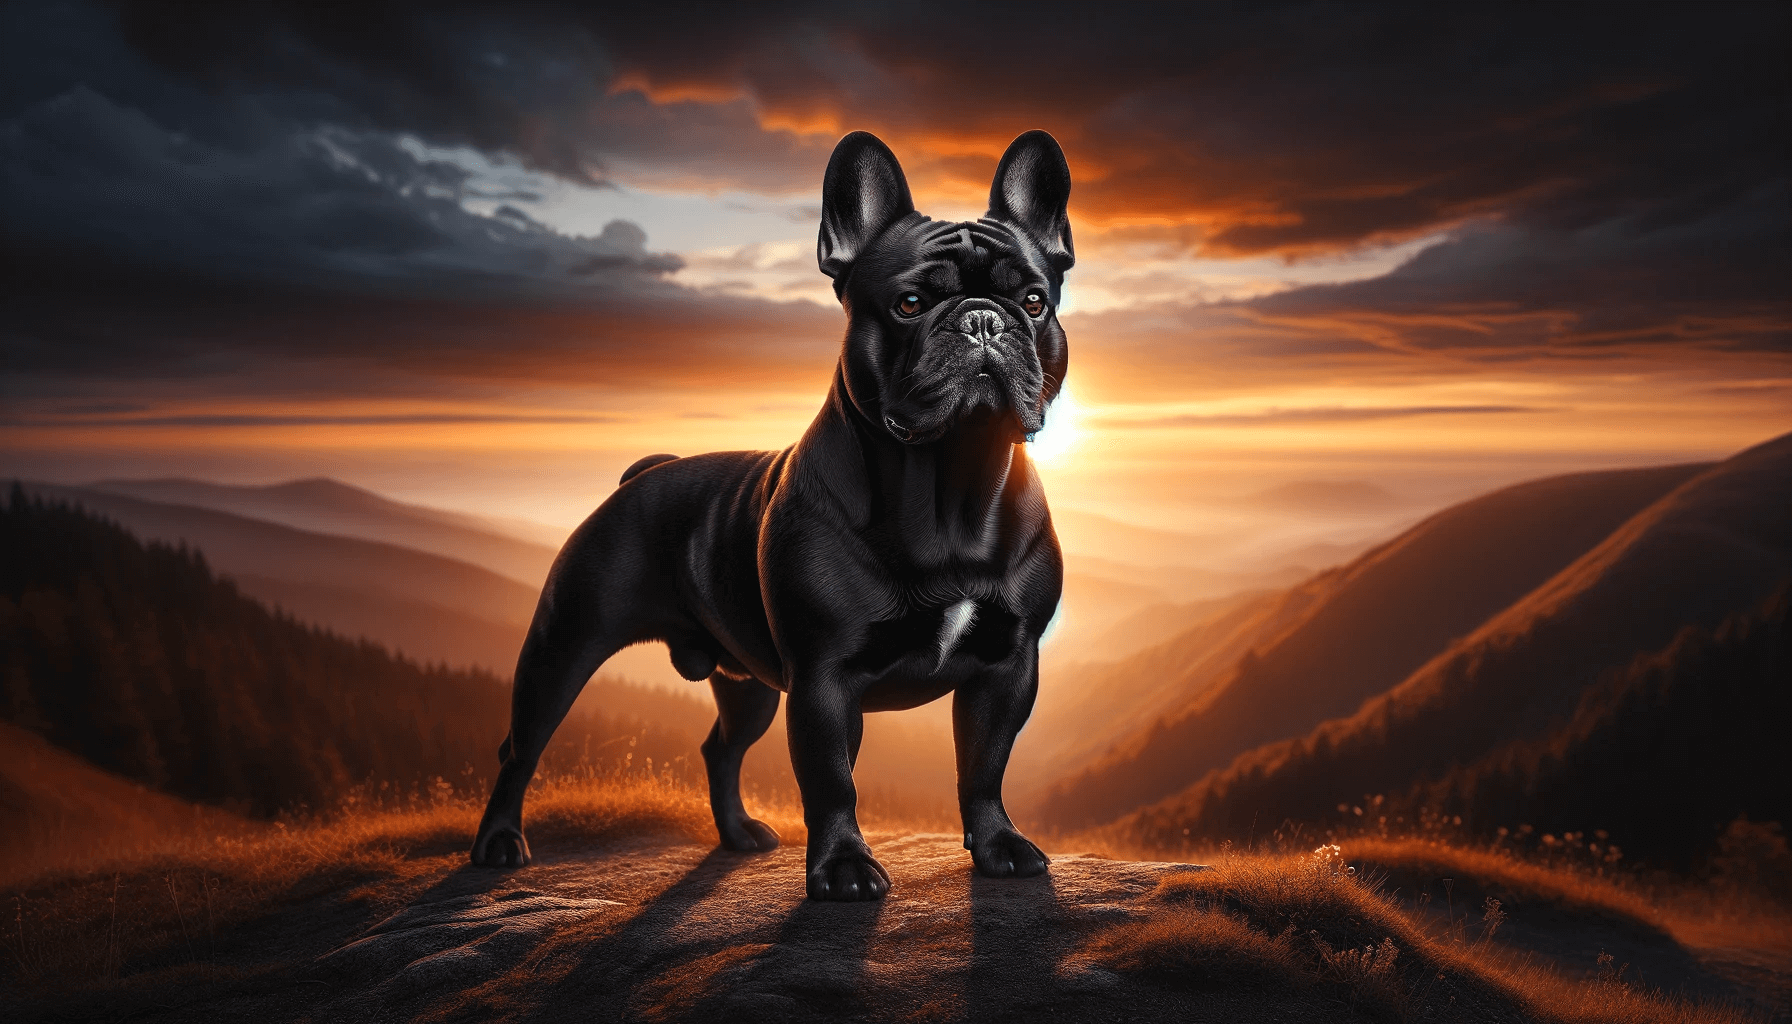 Black French Bulldog Standing on a Hilltop with a Sunset in the Background